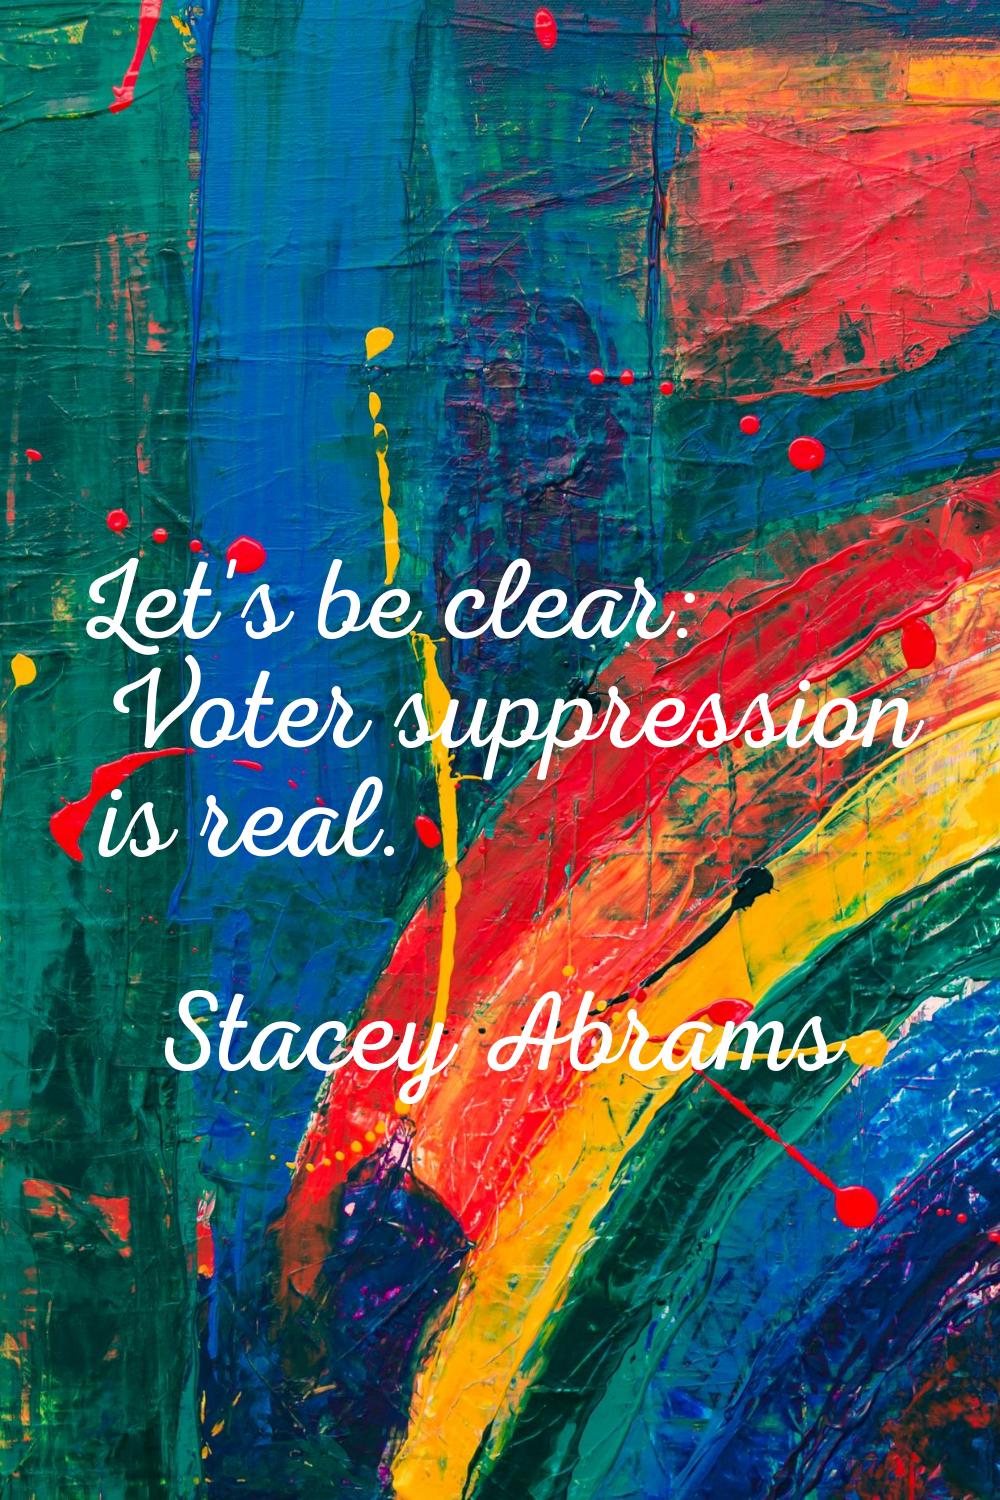 Let's be clear: Voter suppression is real.